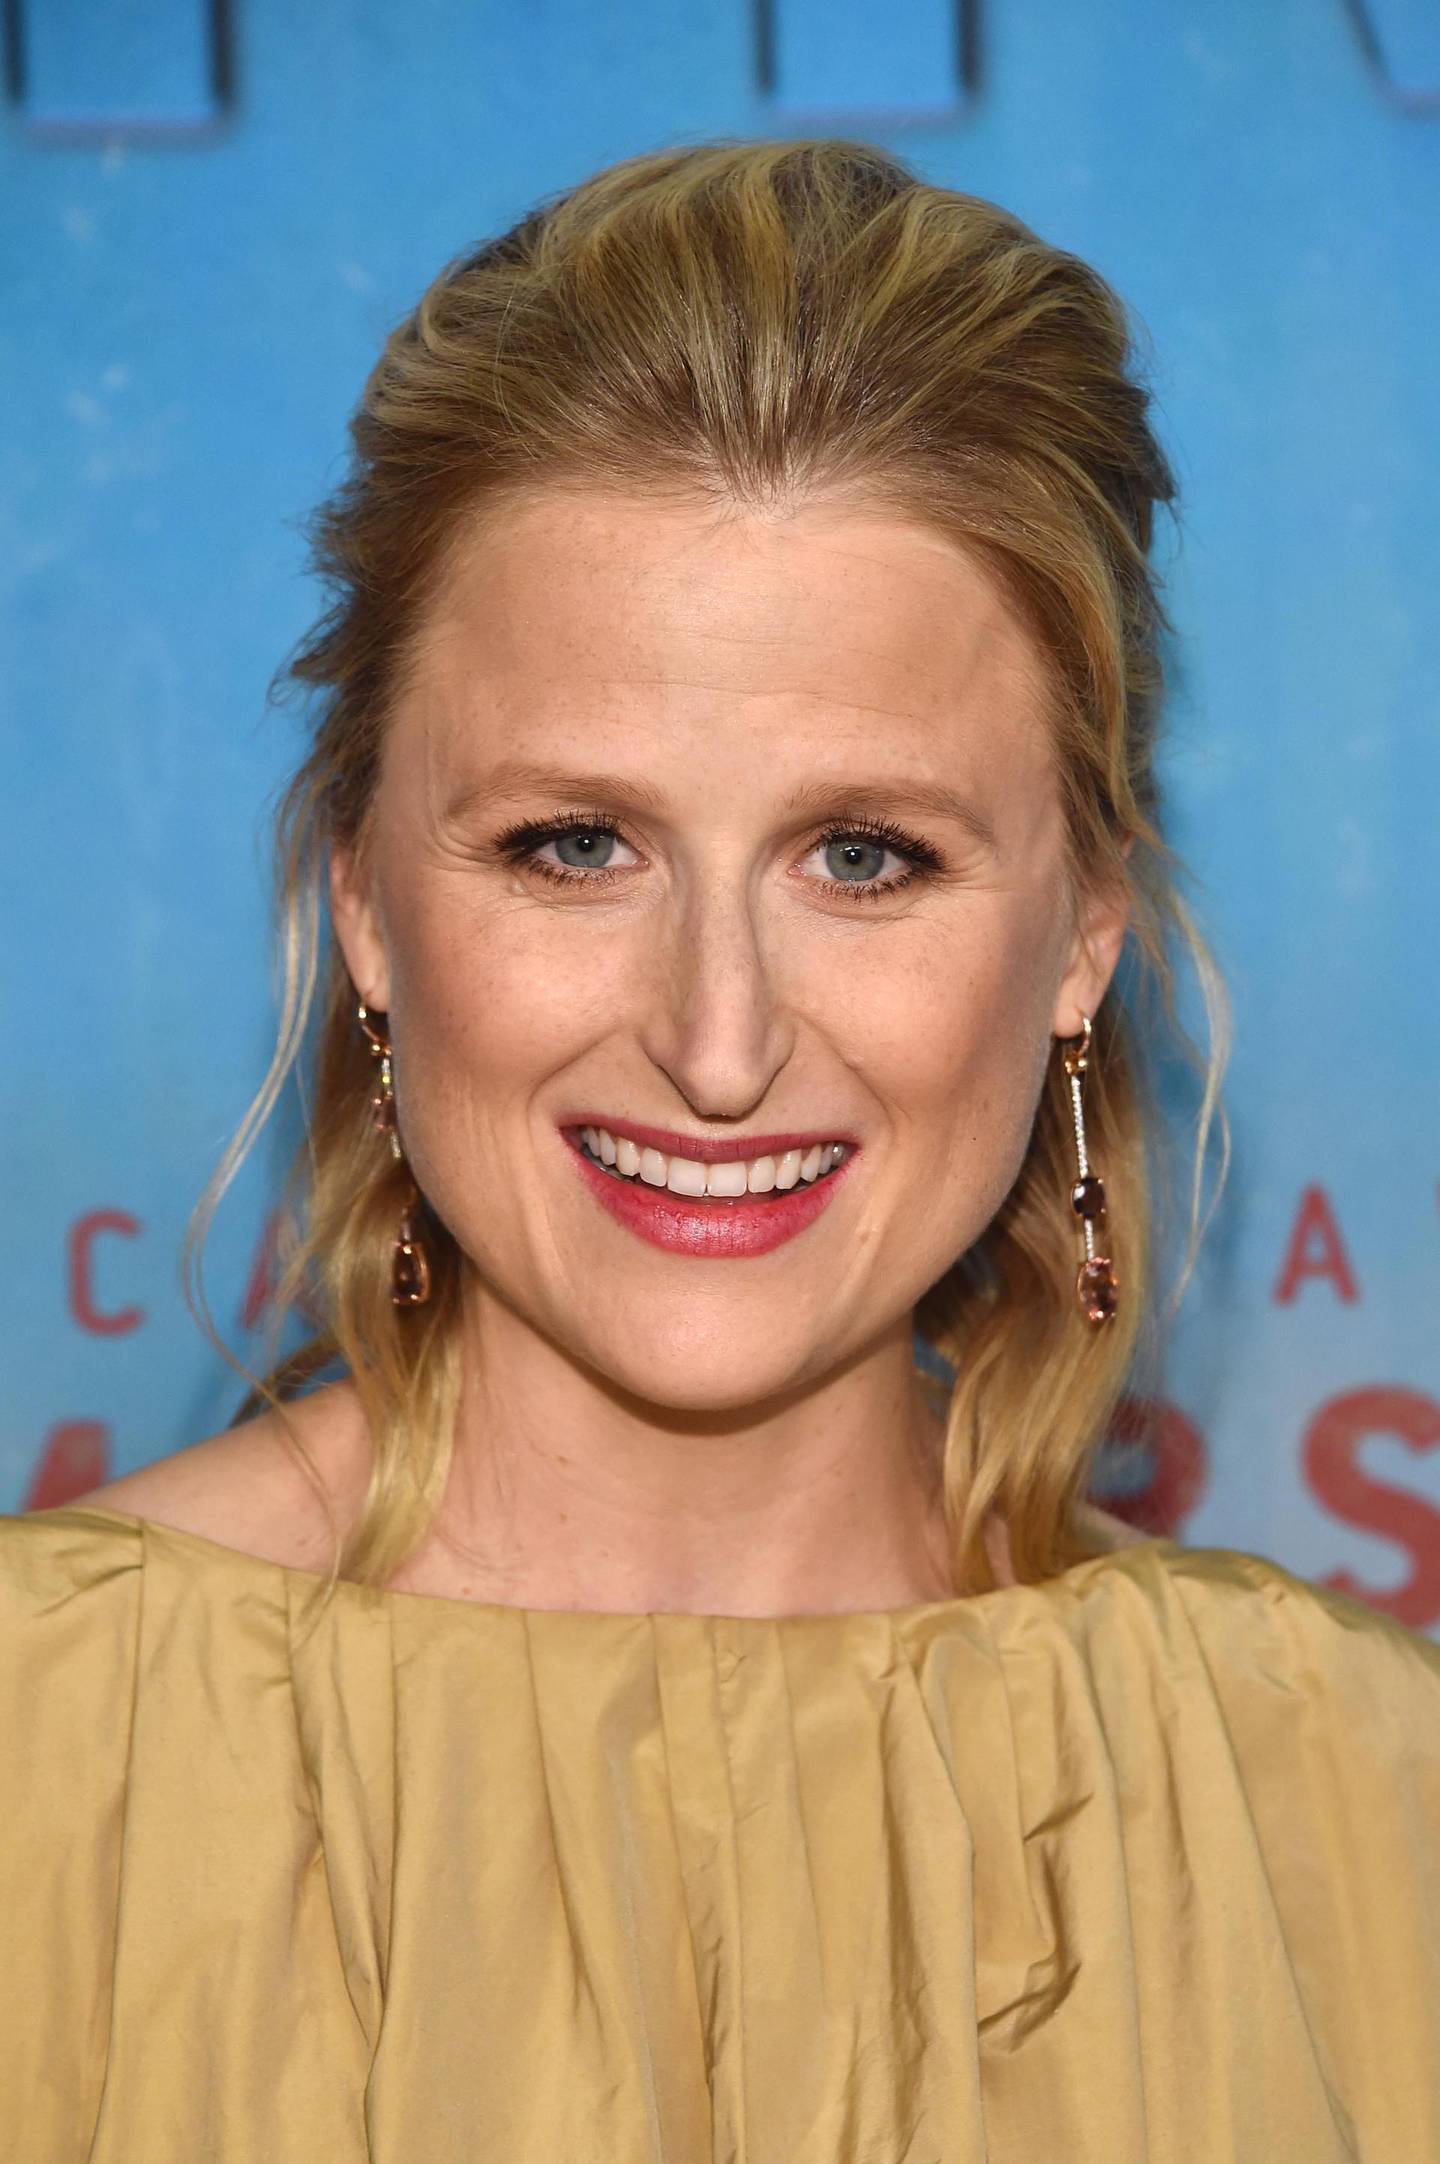 US actress Mamie Gummer arrives for the Los Angeles Premiere of HBO's series "True Detective" season 3 at the Directors Guild of America on January 10, 2019 in Los Angeles. (Photo by Chris Delmas / AFP)